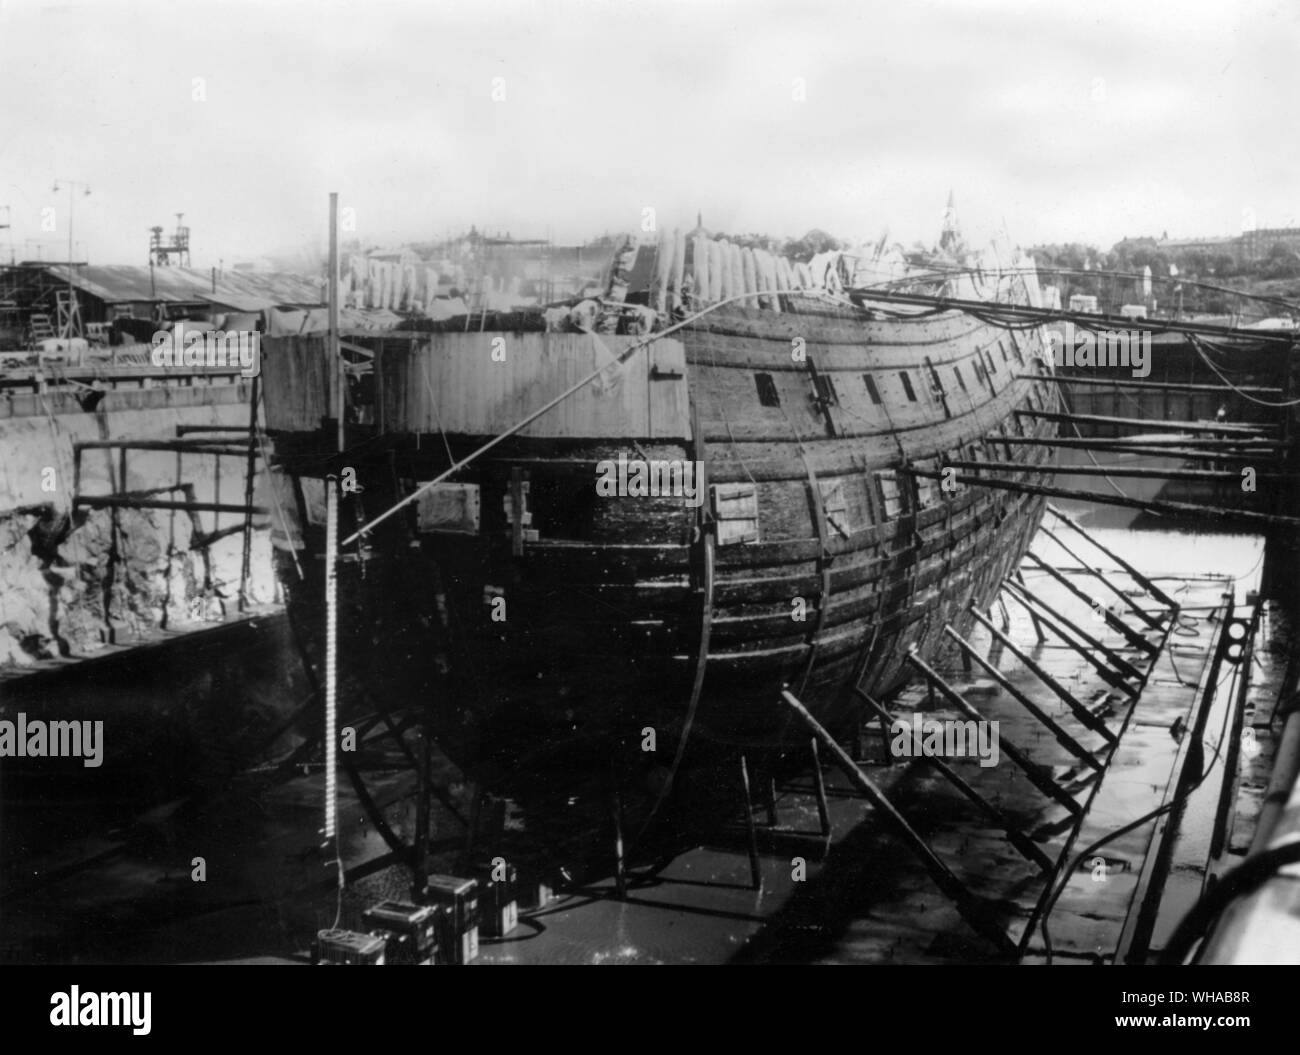 The Wasa in dry dock. Maiden voyage in 1628, raised from the sea bed in 1961 Stock Photo